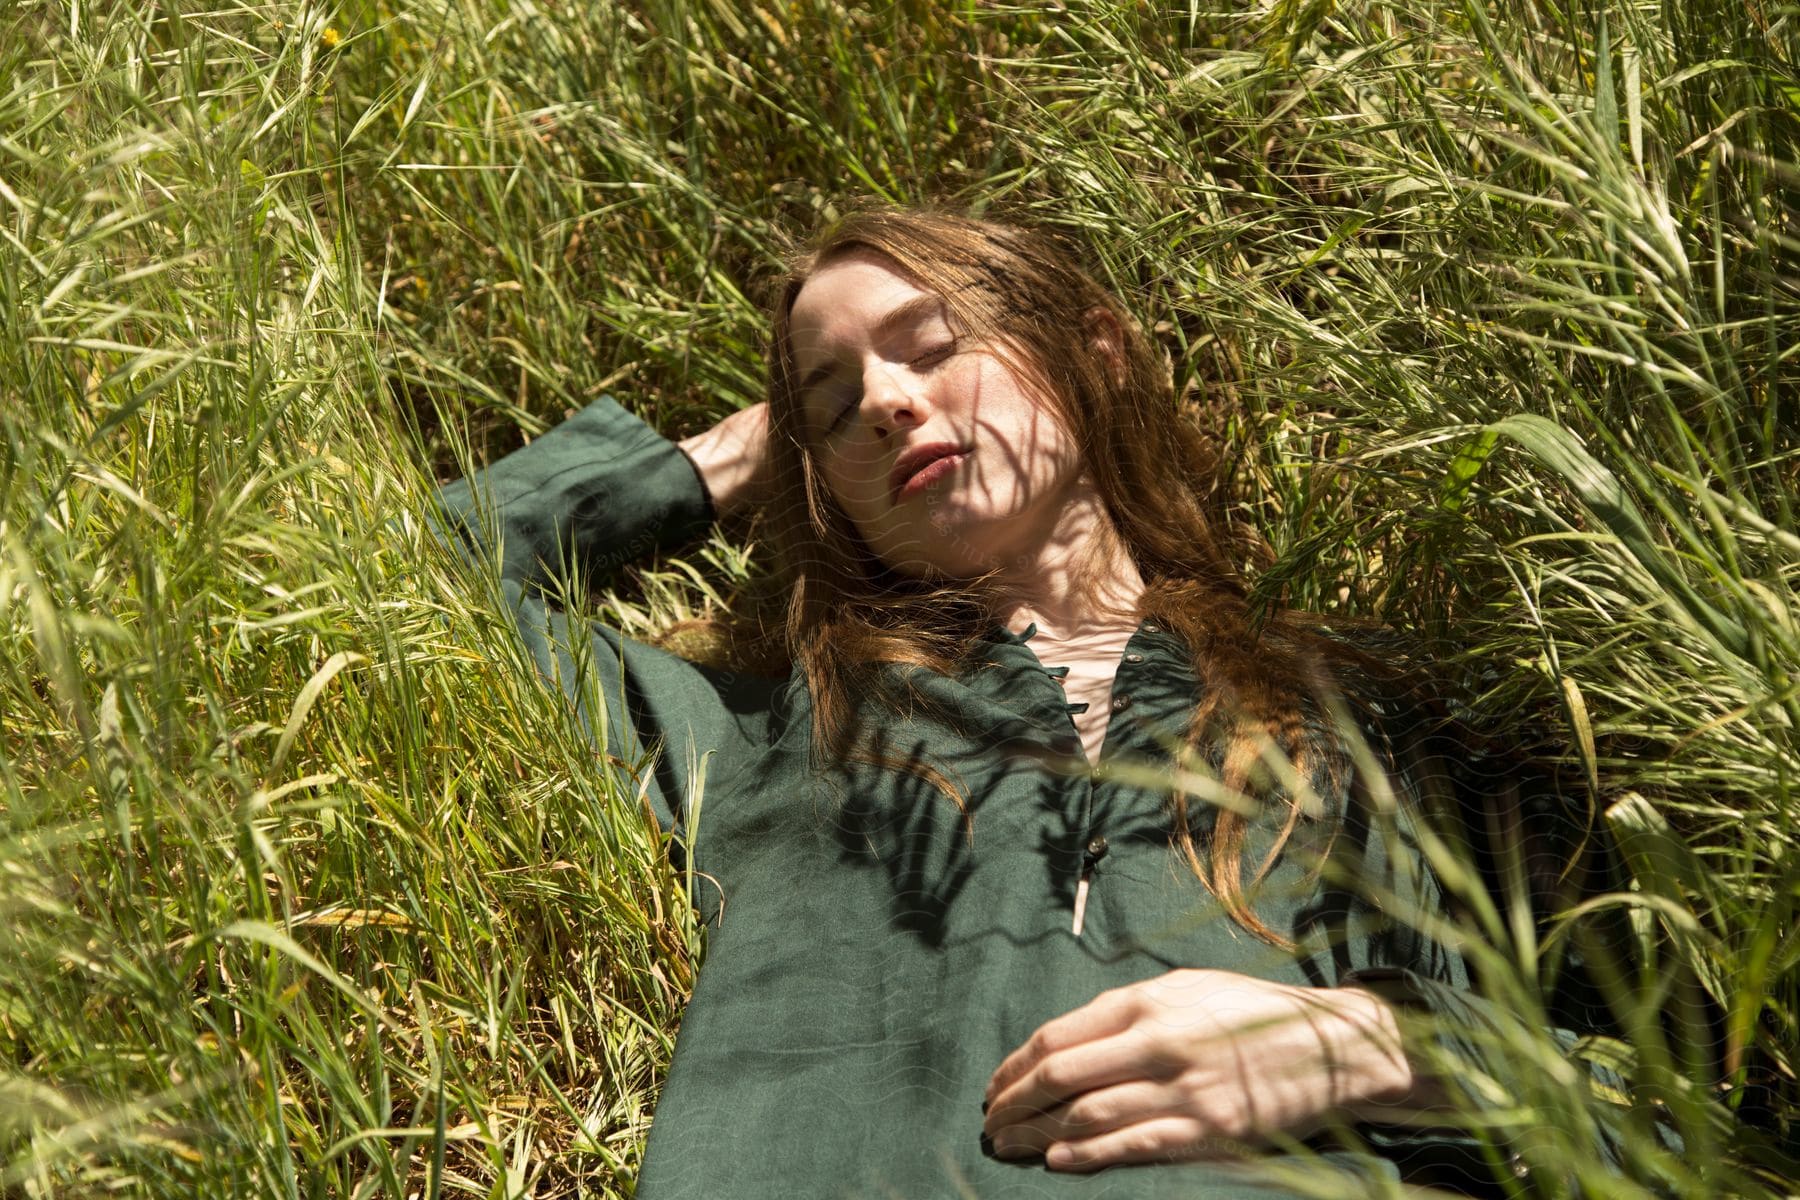 A teenage girl relaxes on the grass in a light jacket